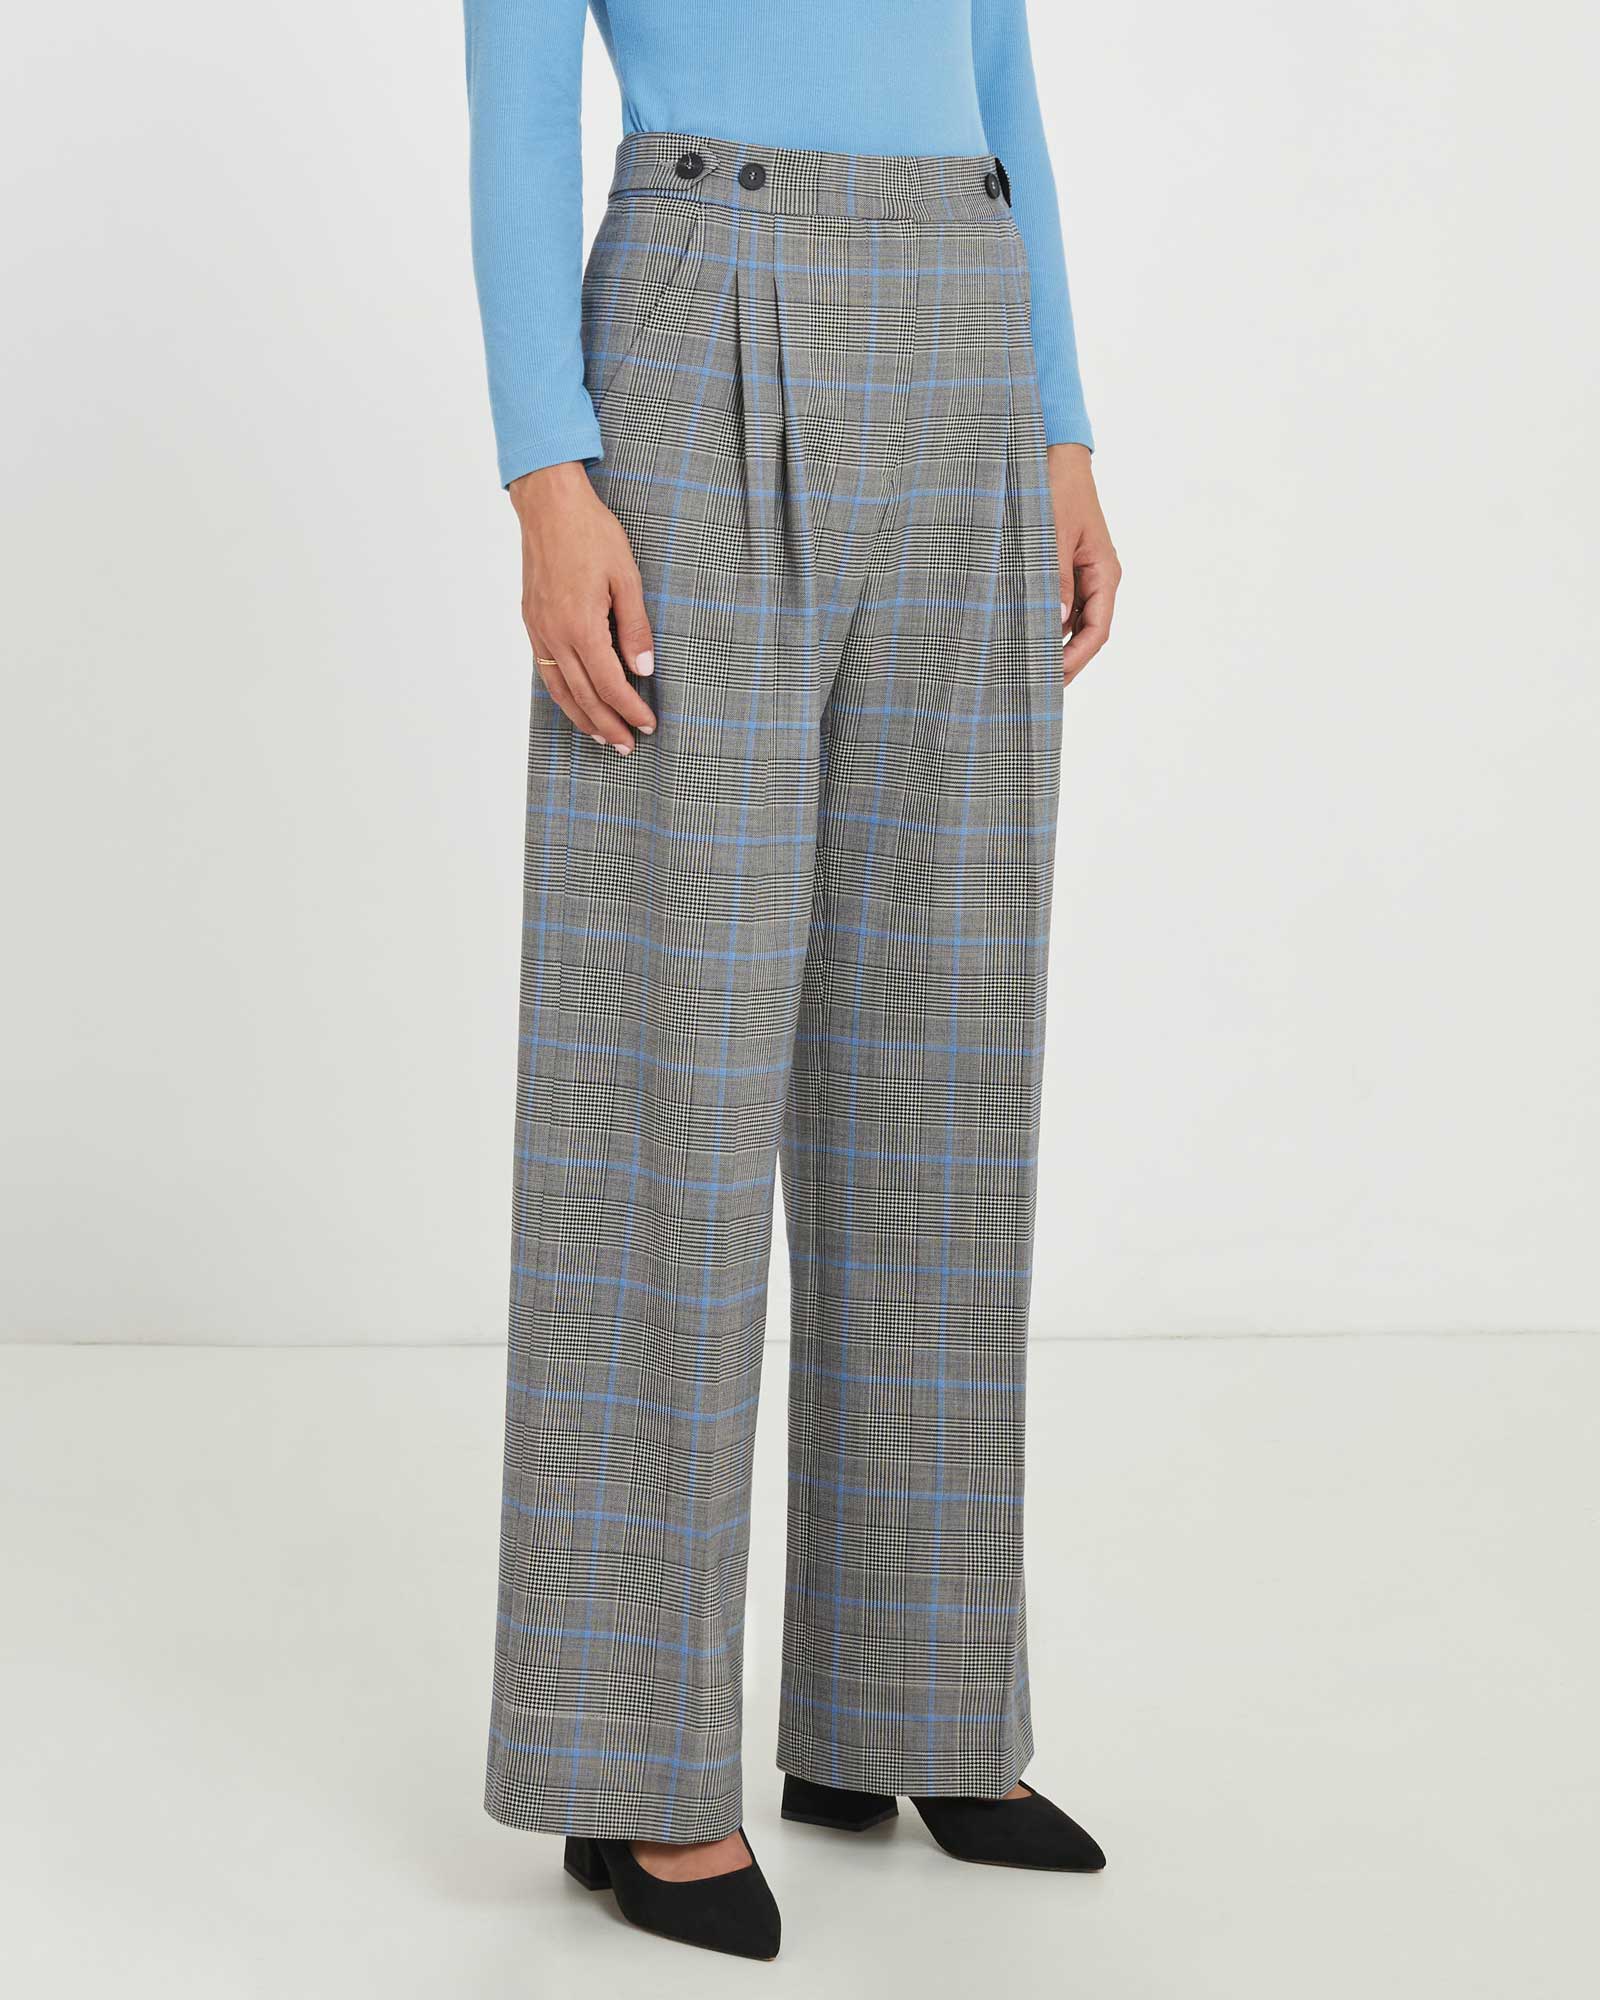 Power Hour Pleat Pant Wool Blue London Check